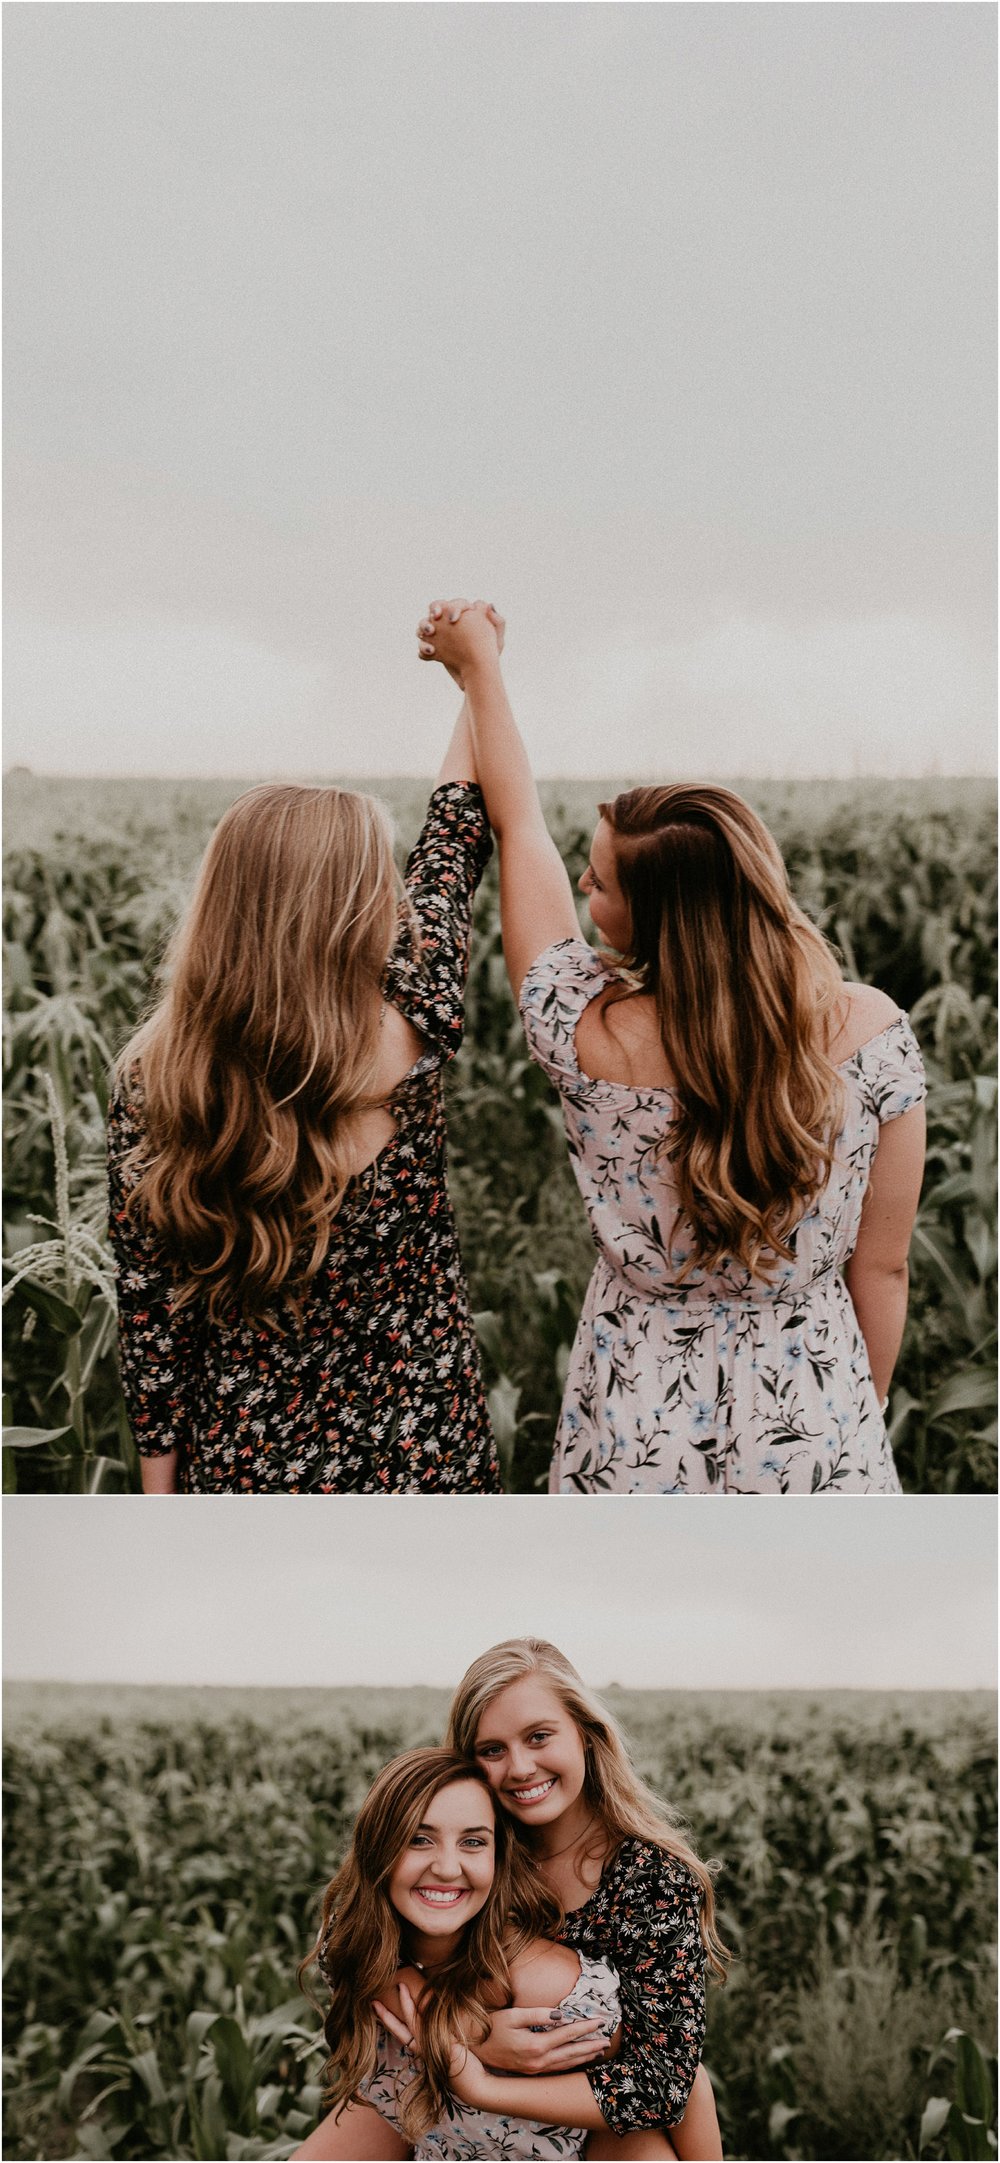 Boise Senior Photographer Idaho Summer Senior Pics Cornfield Linder Farms Floral Dress Flowers Sisters Love Family Pictures Makayla Madden Photography 